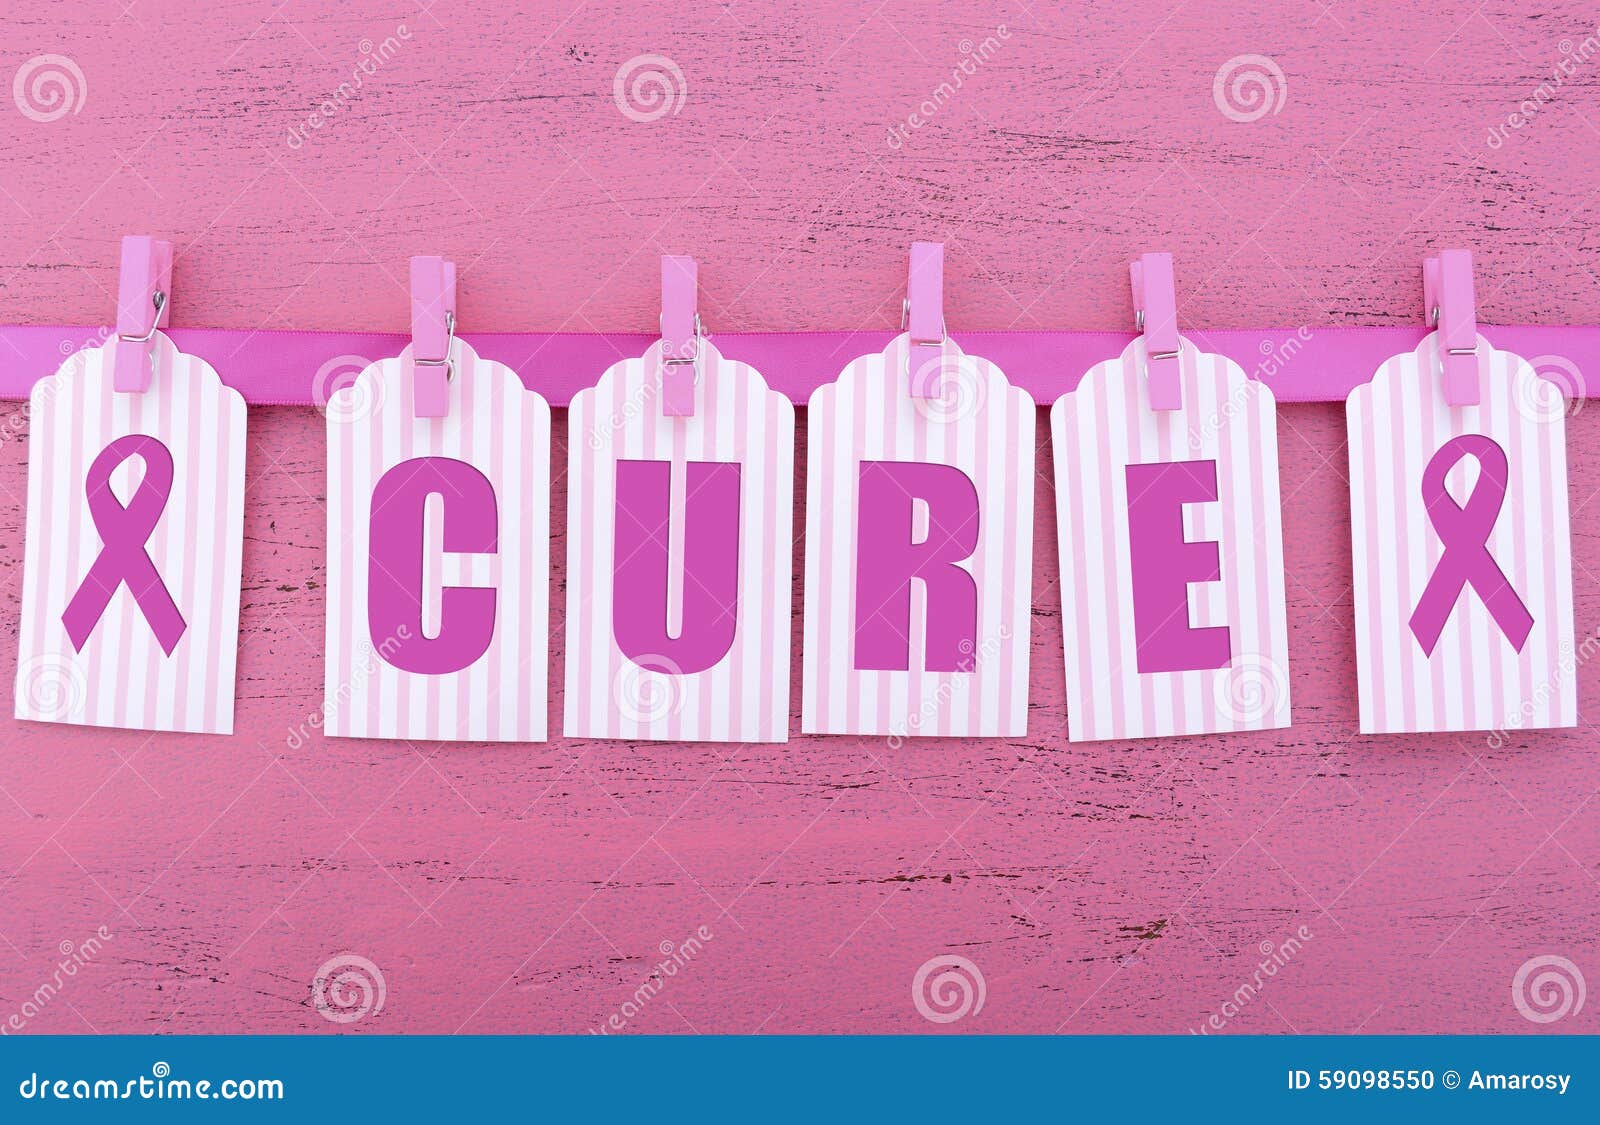 pink ribbon charity for womens health awareness cure message.